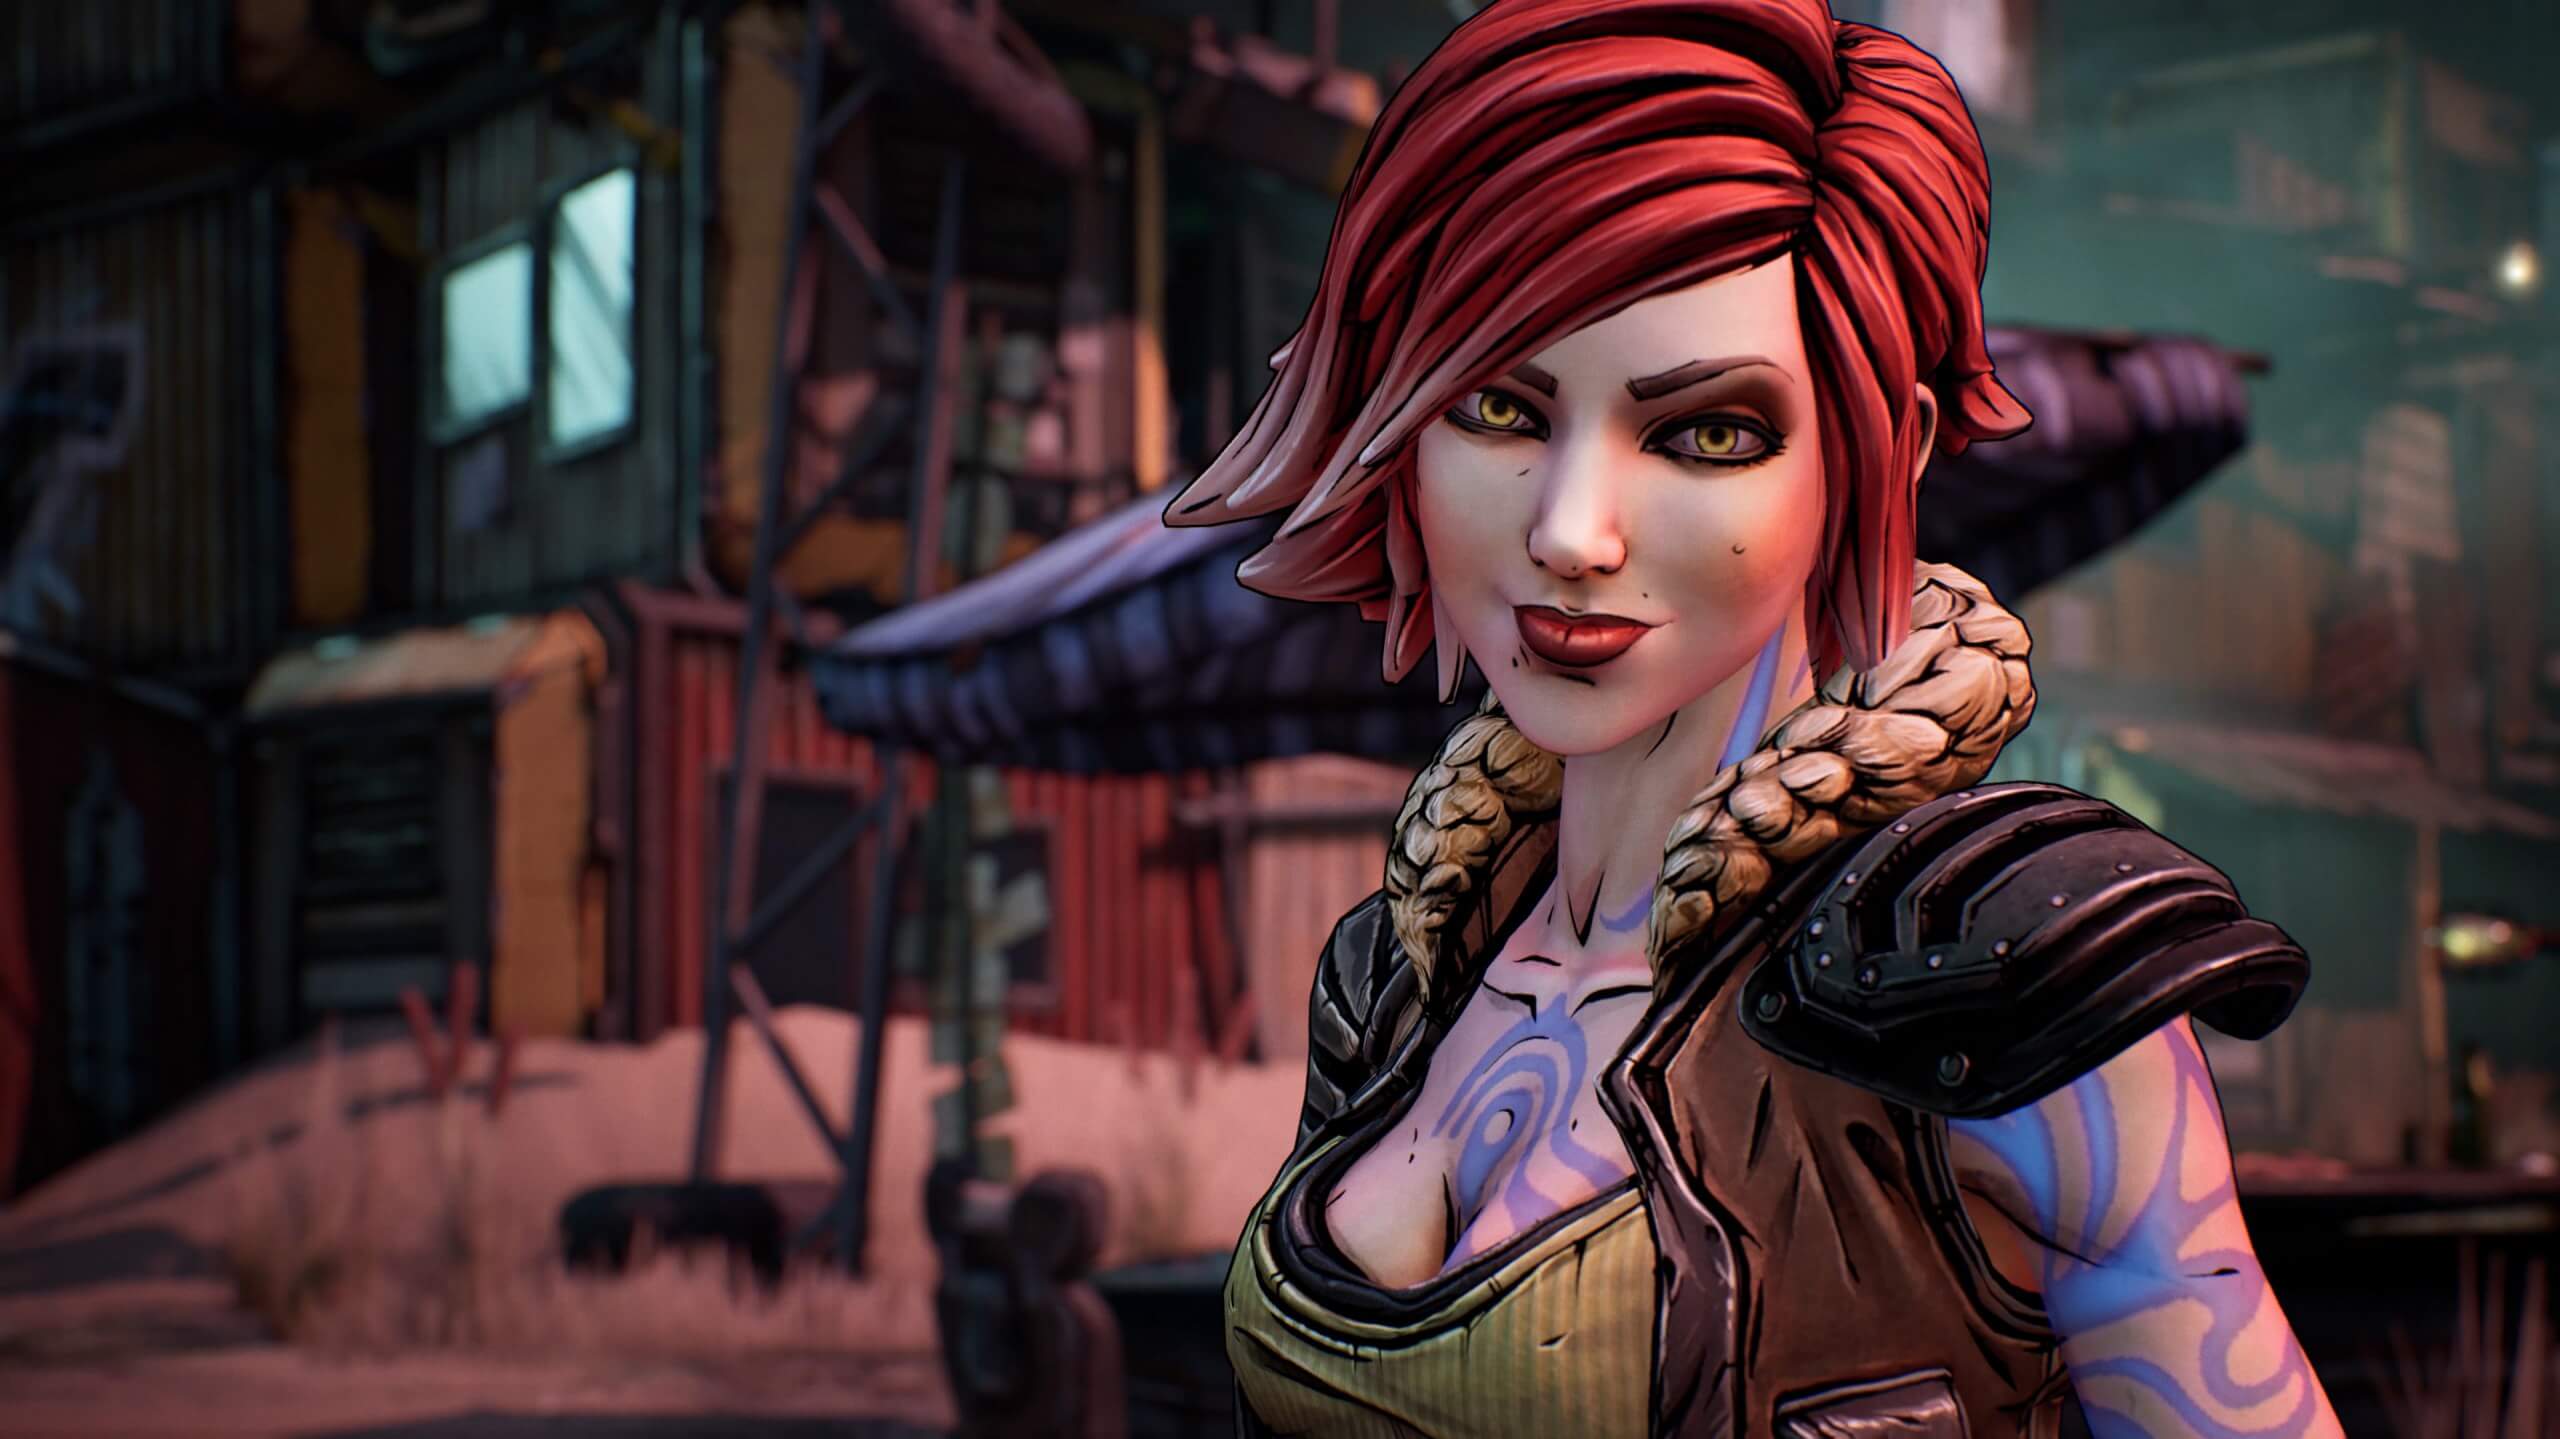 Lionsgate confirms rumored 'Borderlands' movie directed by Eli Roth